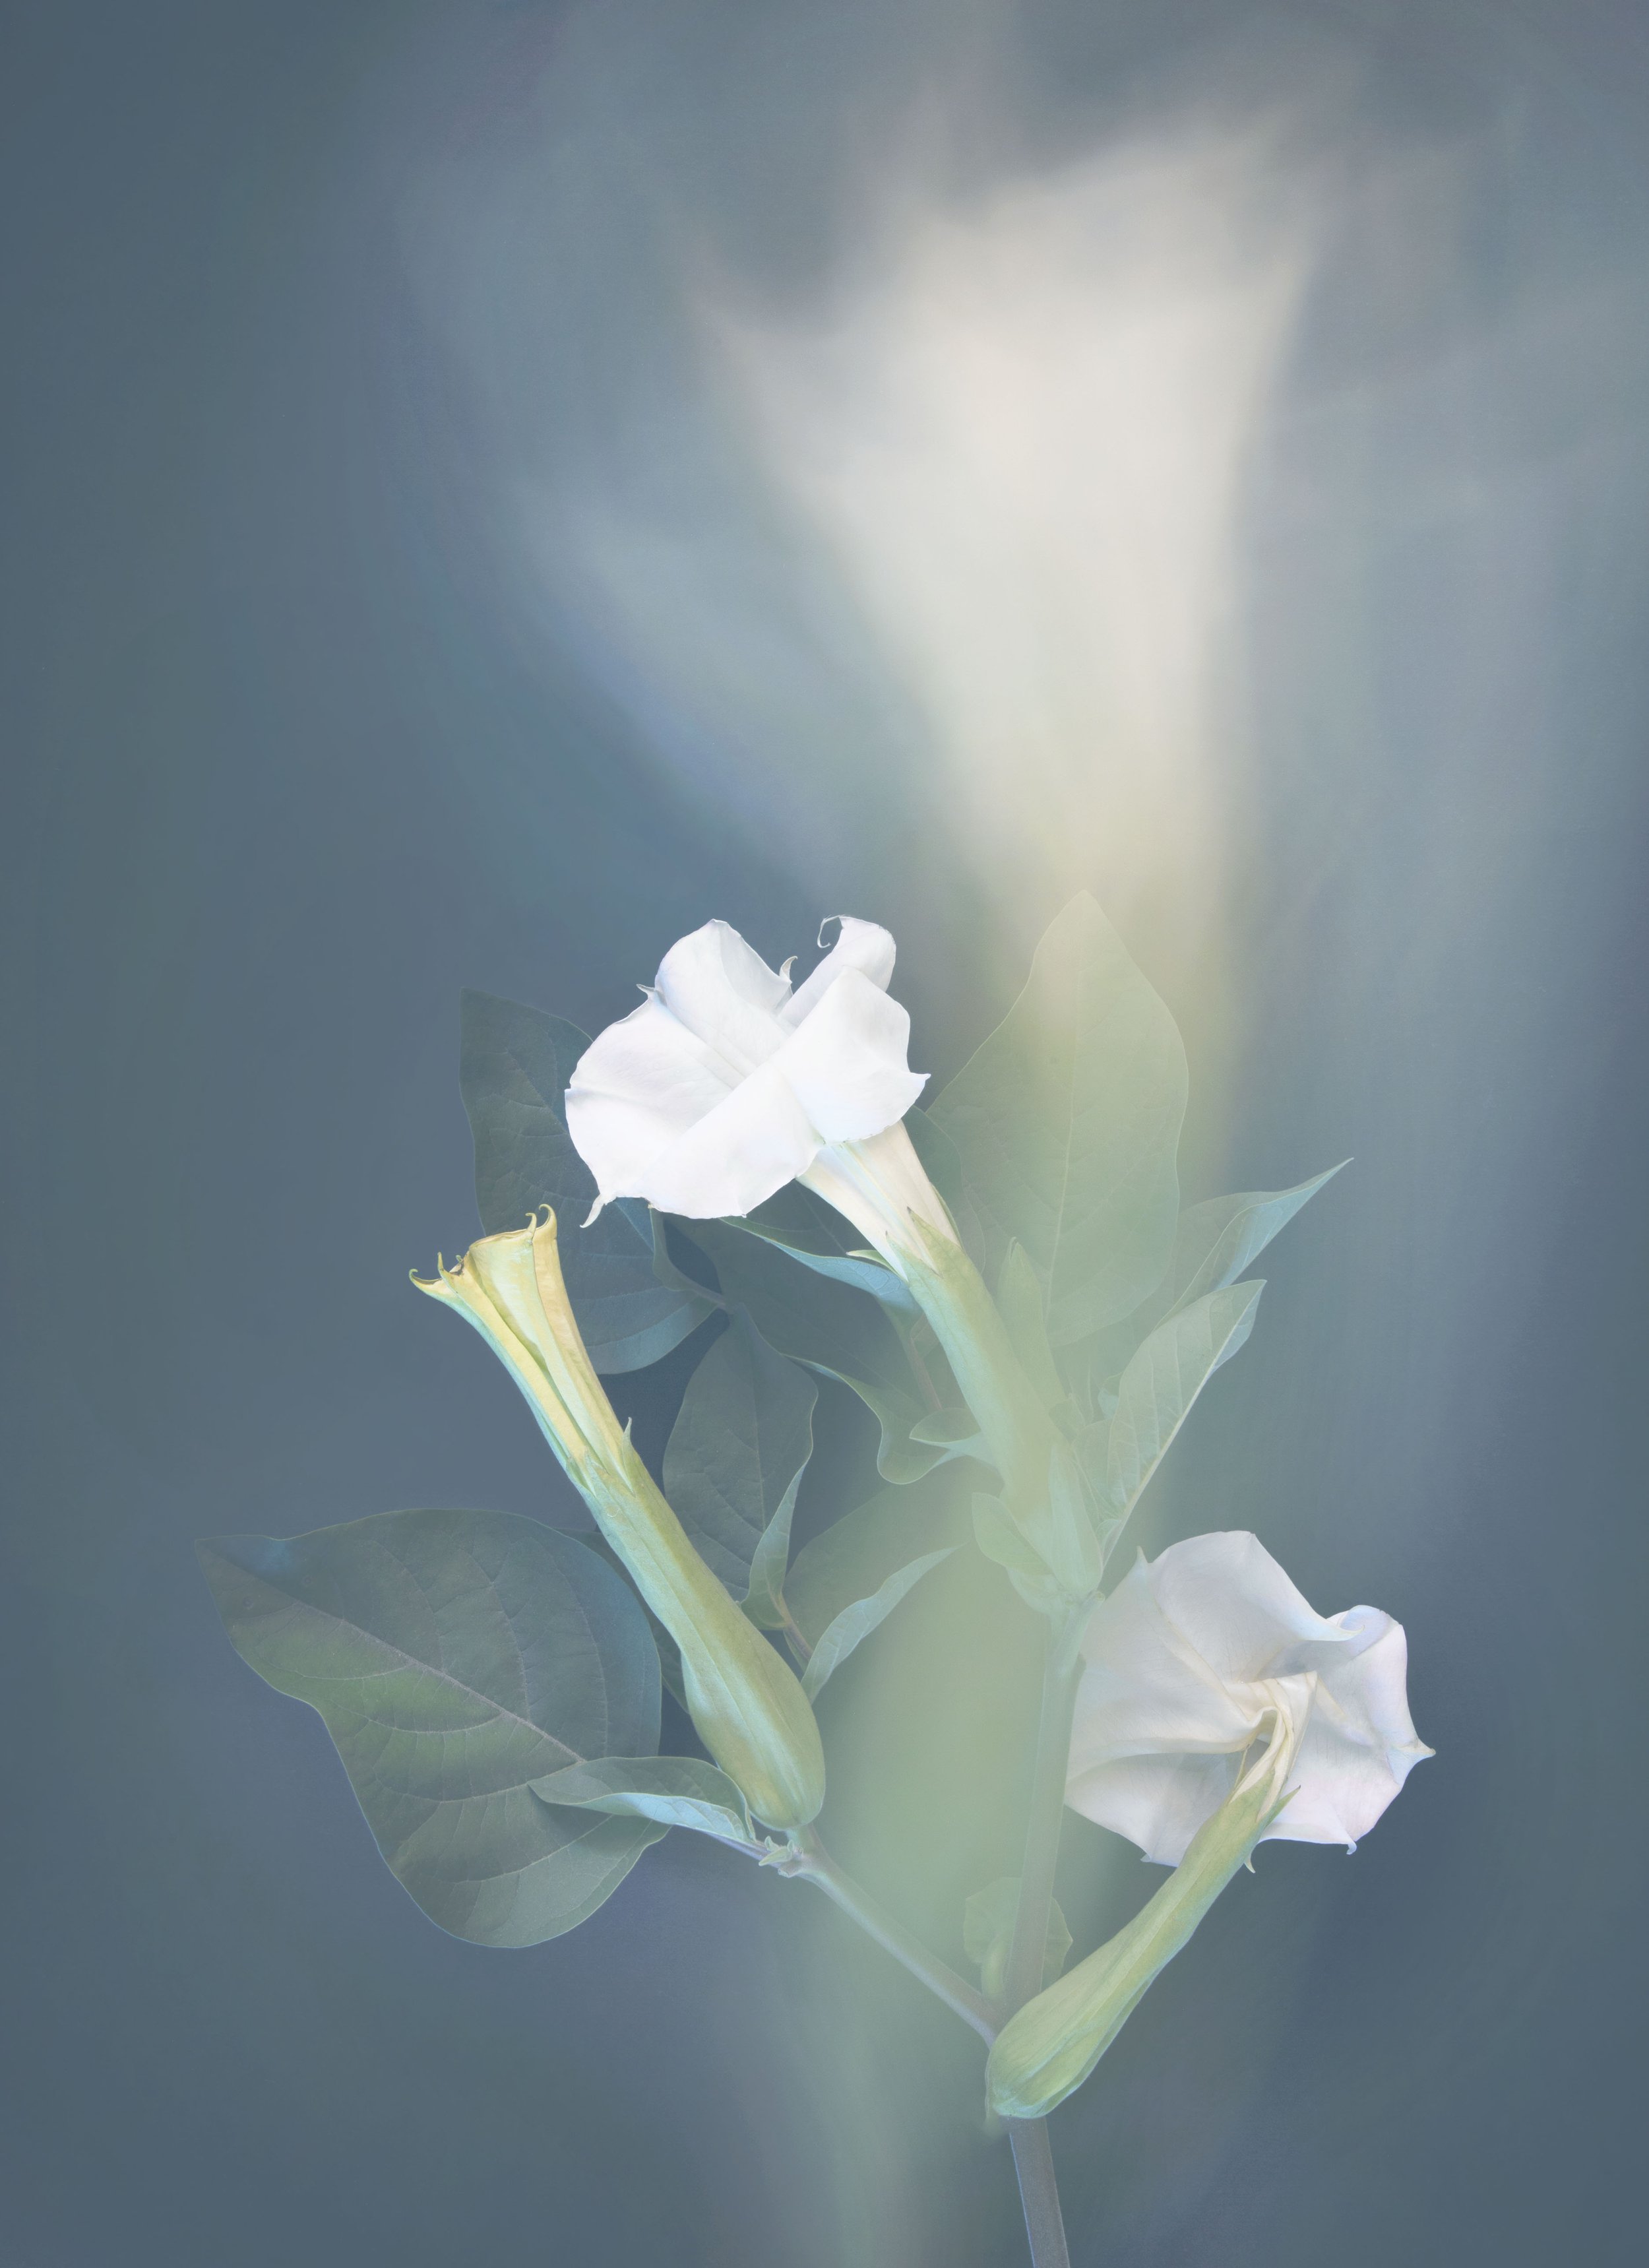 Joyce Tenneson, Angel's Trumpet, 2/10, 2021, Archival pigment prints, 22 x 17 inches, $1,900. 